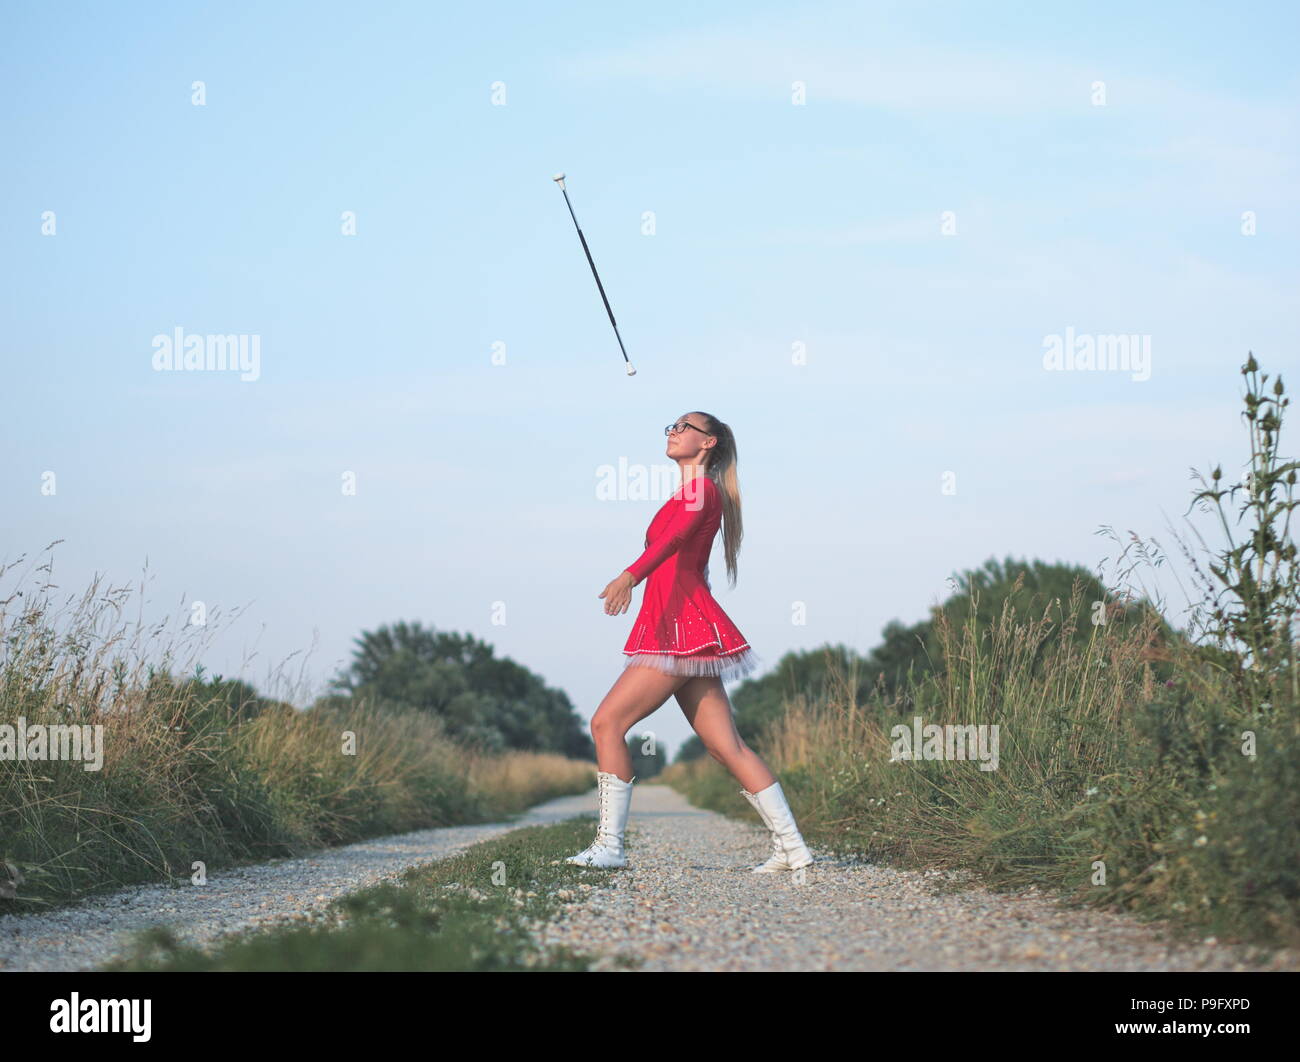 Bespectacled Blonde Teen Majorette Girl Twirling Baton Outdoors in Red Dress Stock Photo